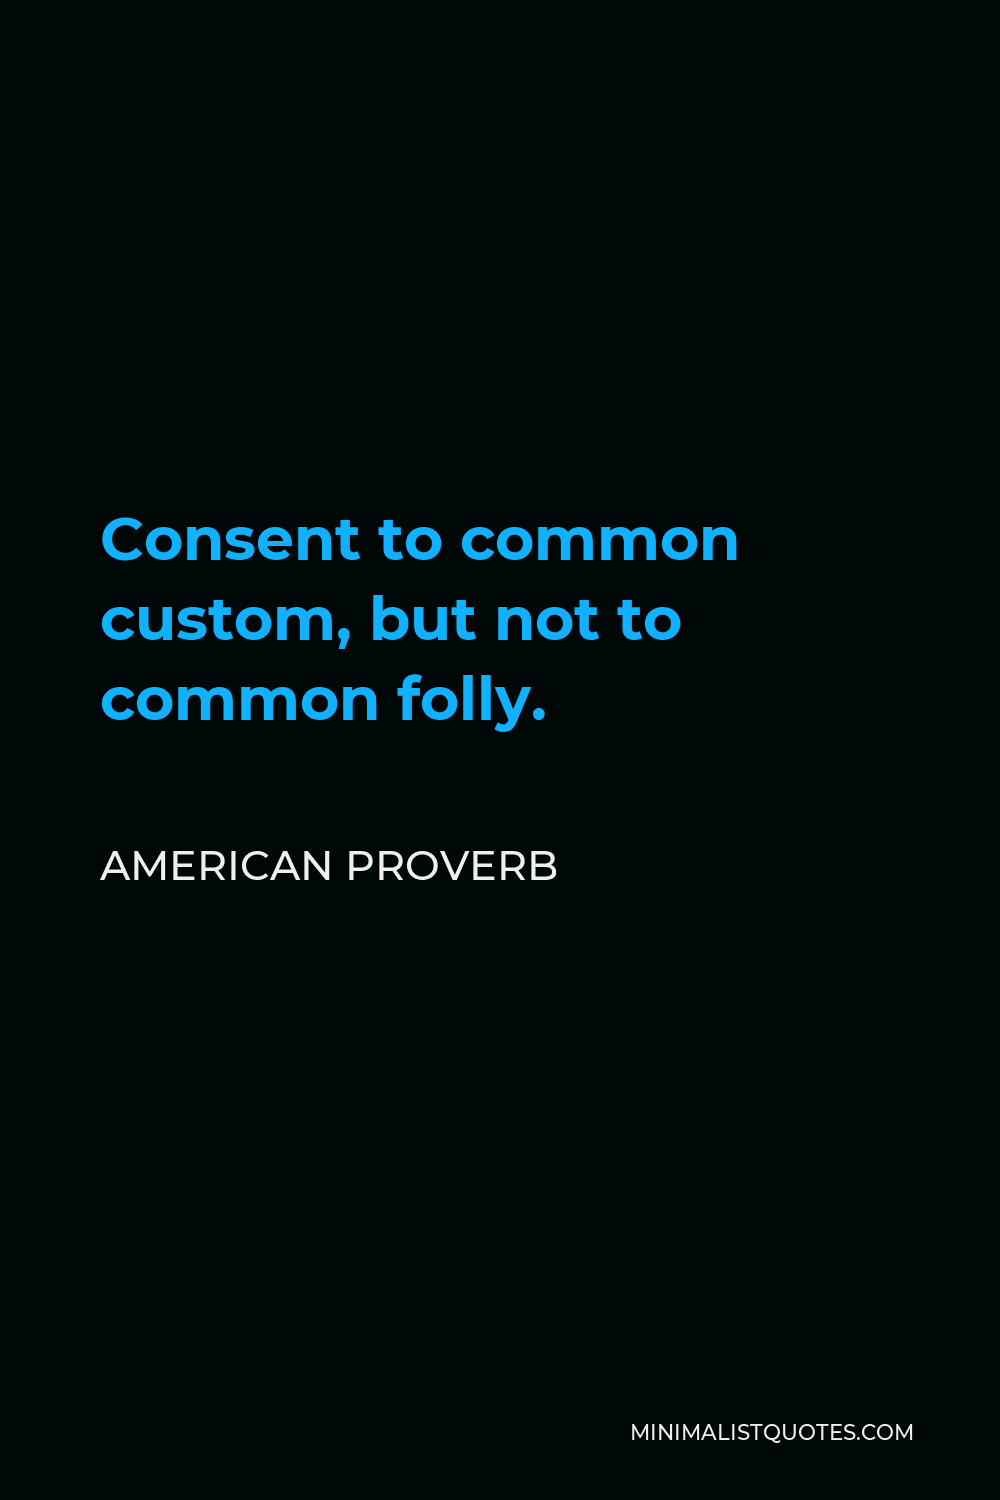 American Proverb Quote - Consent to common custom, but not to common folly.